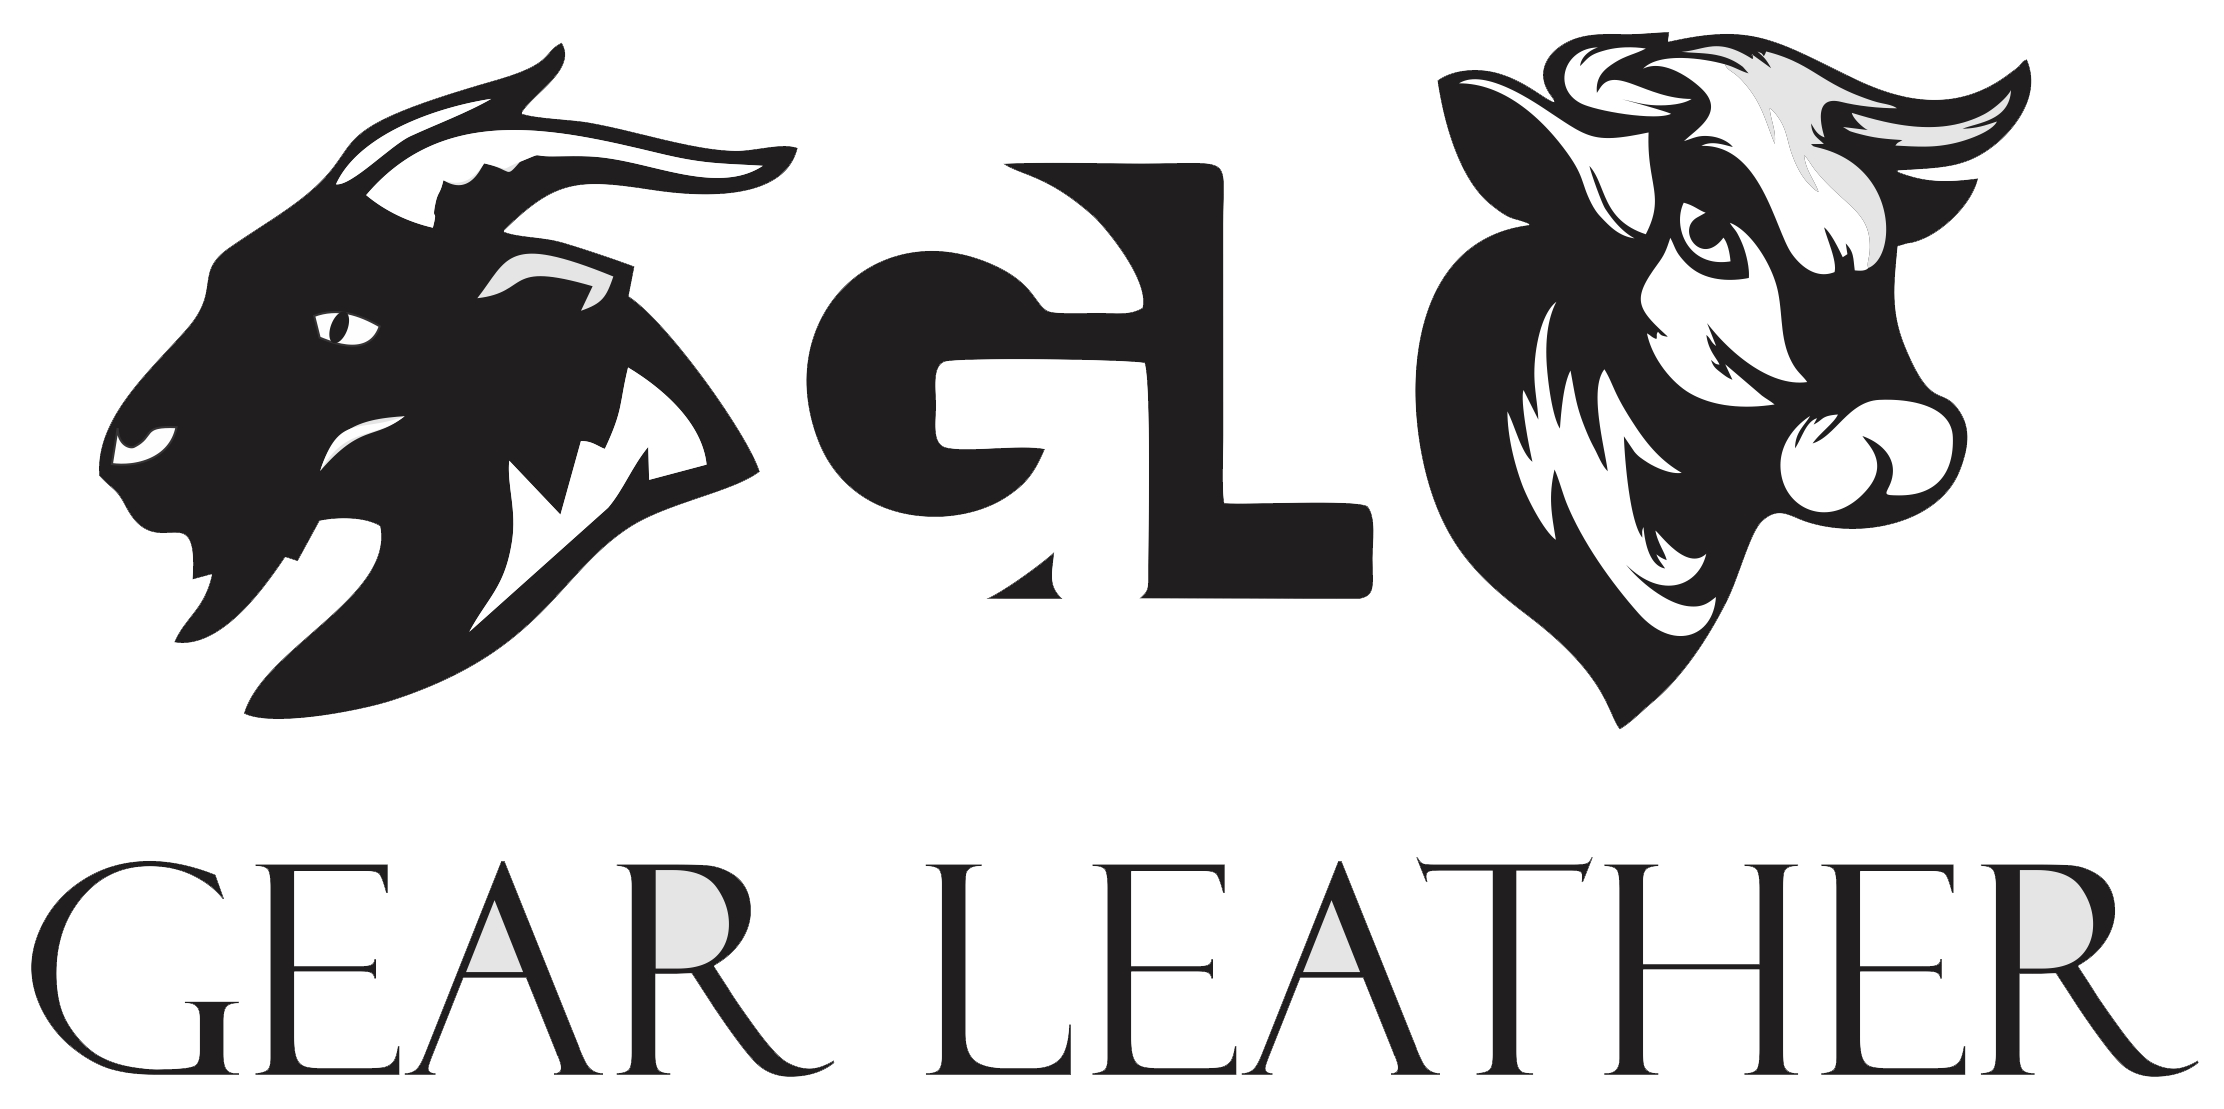 Gear Leather Manufacturer and Exporter of Men and Women Leather Products